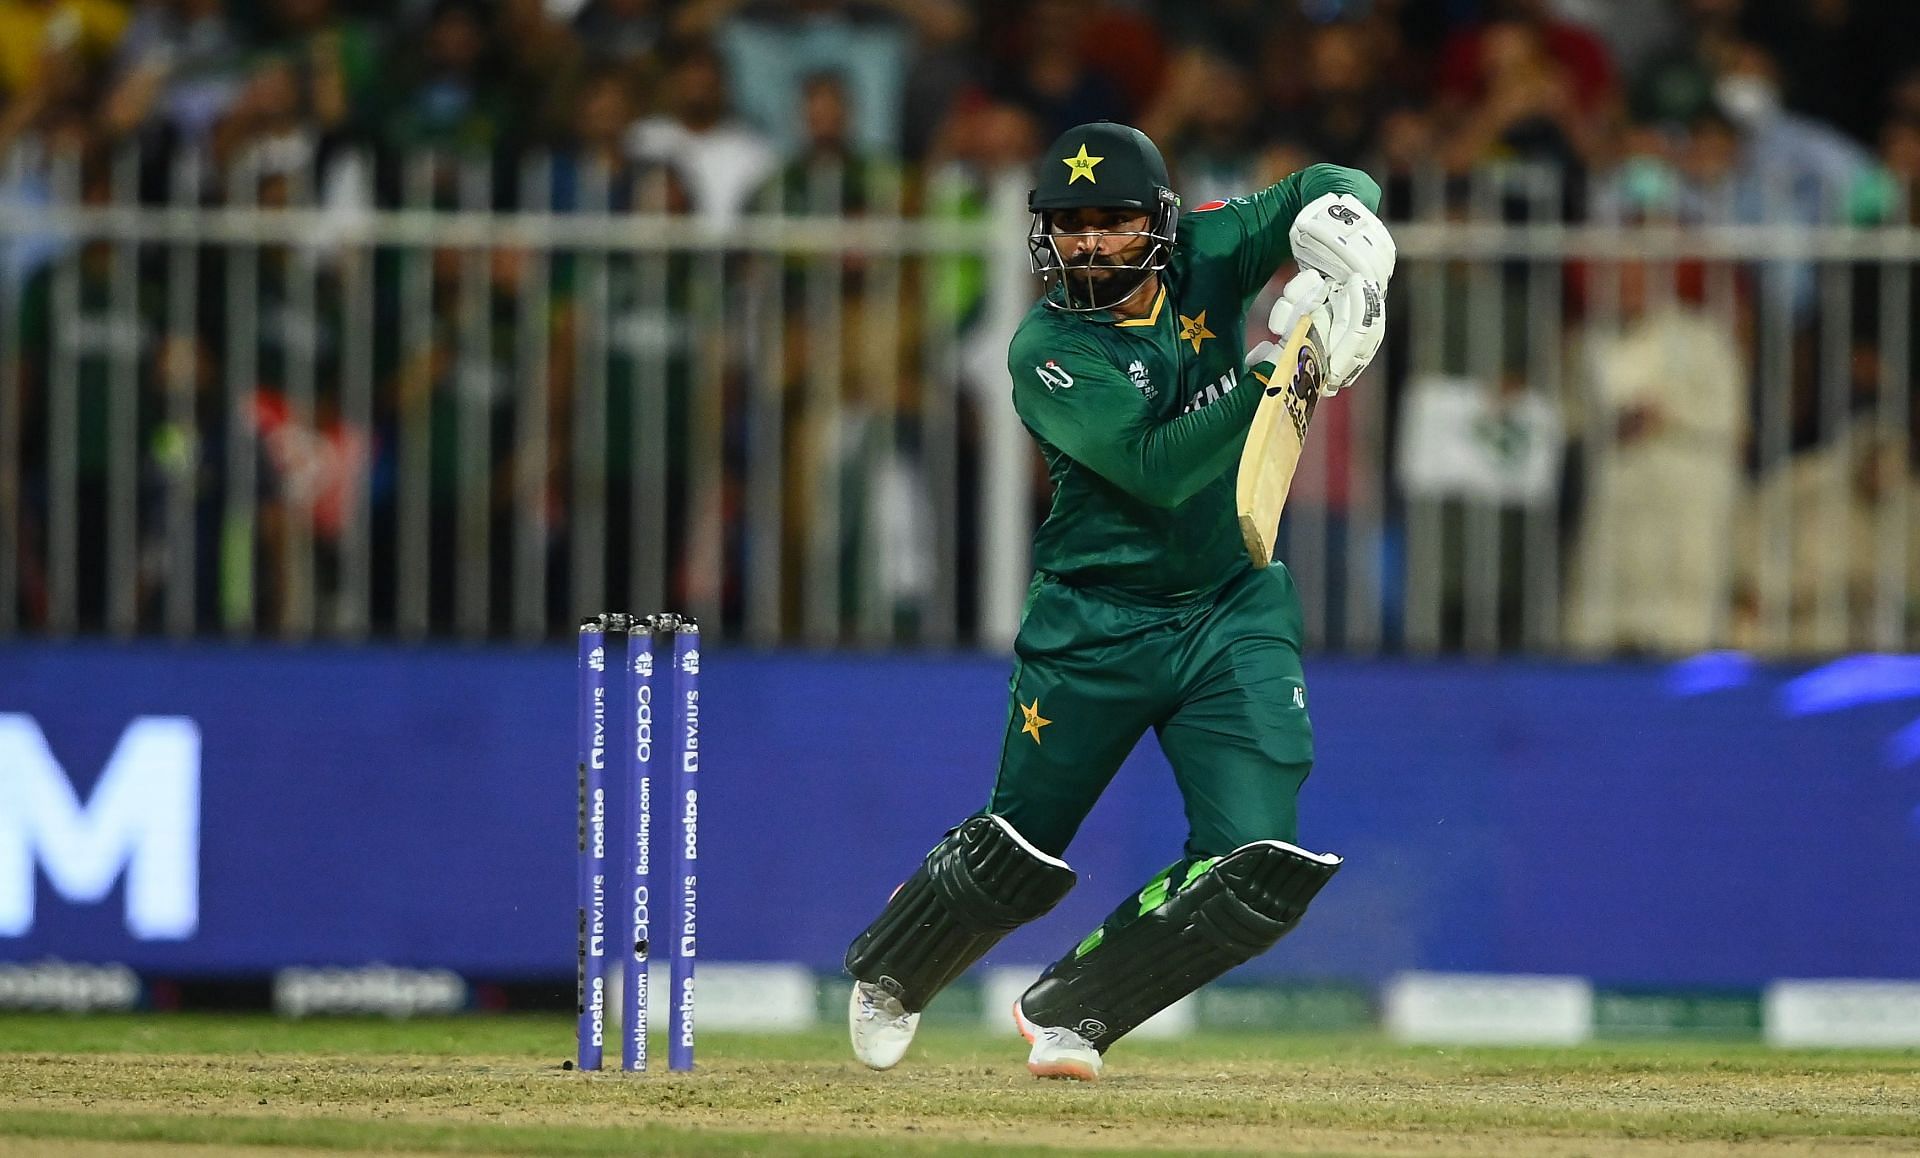 Asif Ali created a new world record during the second week of the ICC T20 World Cup 2021